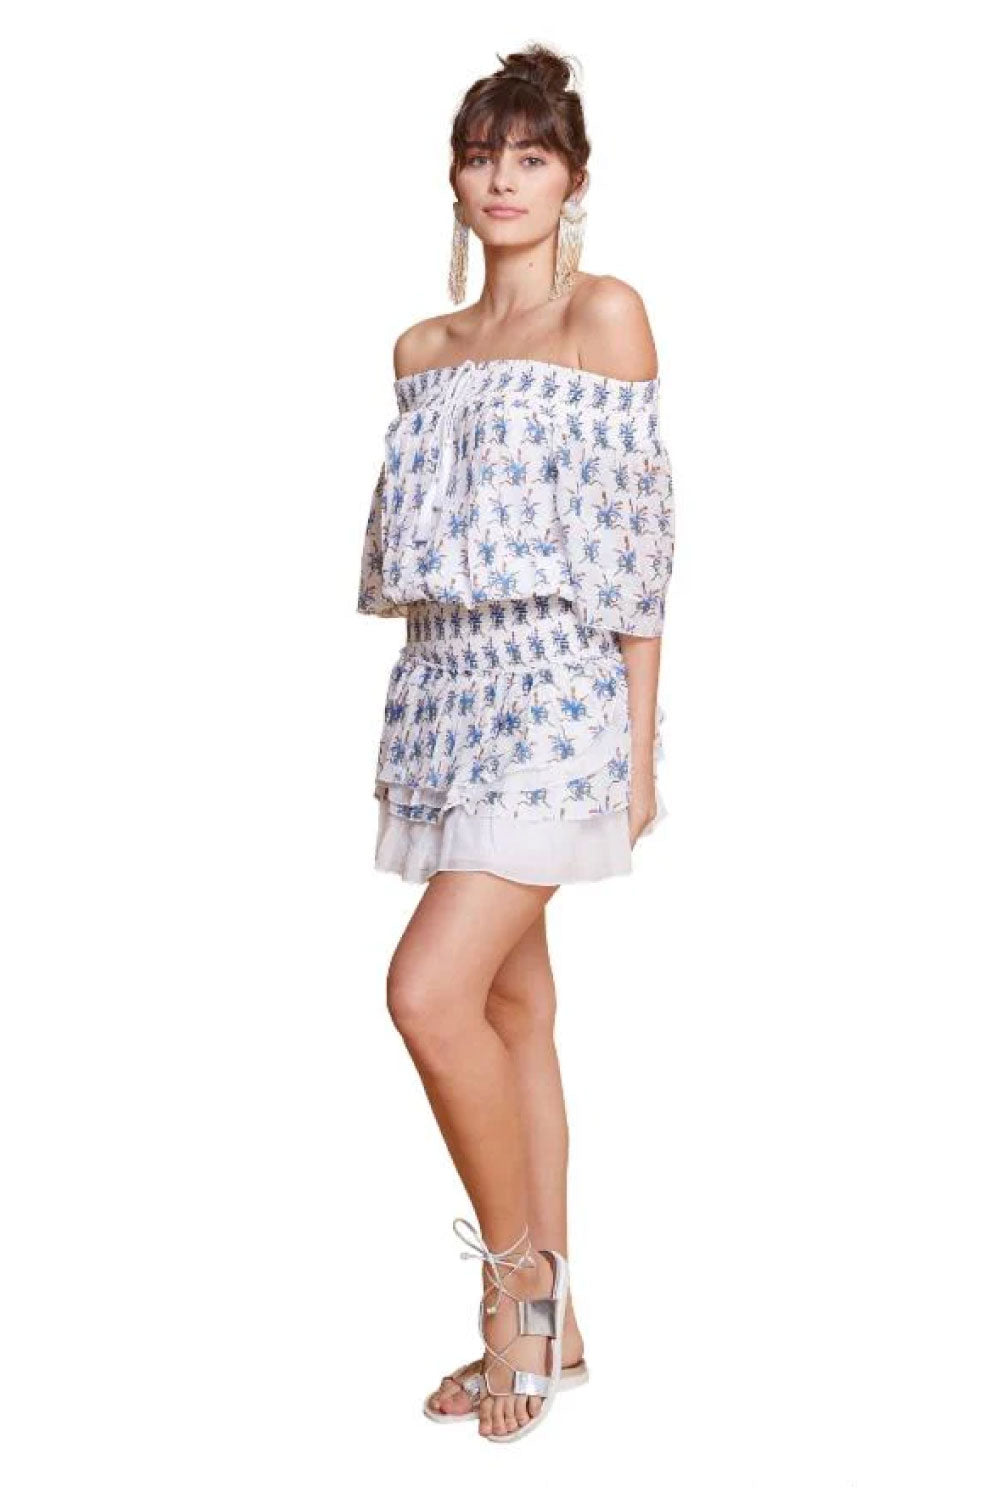 Image of the front of Guadalupe Design's Anais Mini Dress in Blue and White on a model.